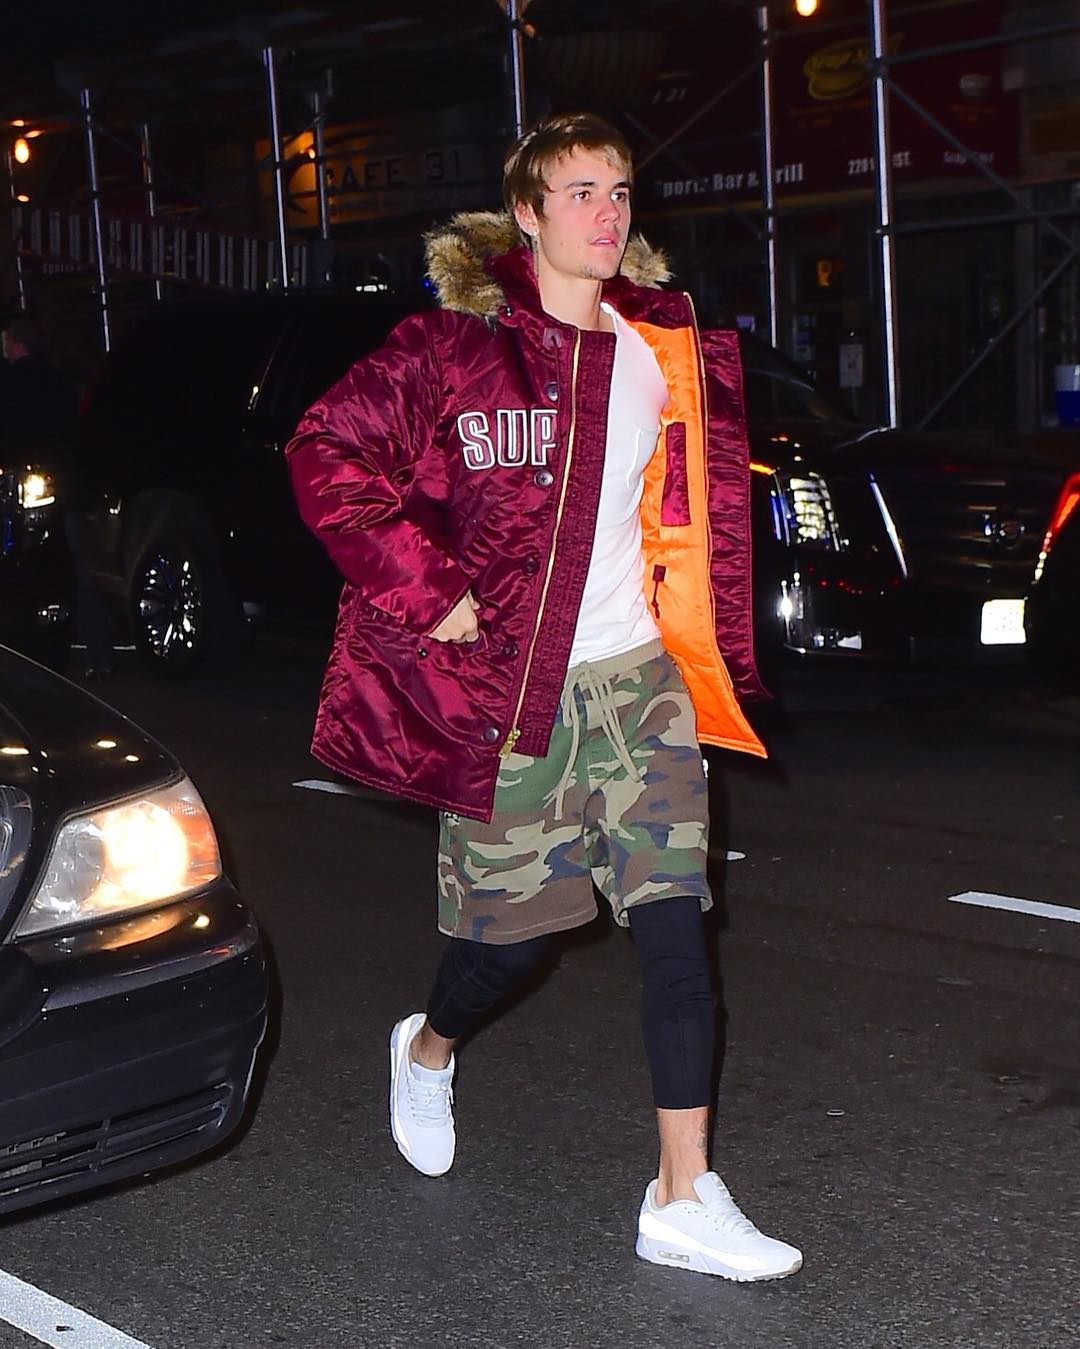 SPOTTED: Justin Bieber Wears Louis Vuitton x Supreme Overalls in